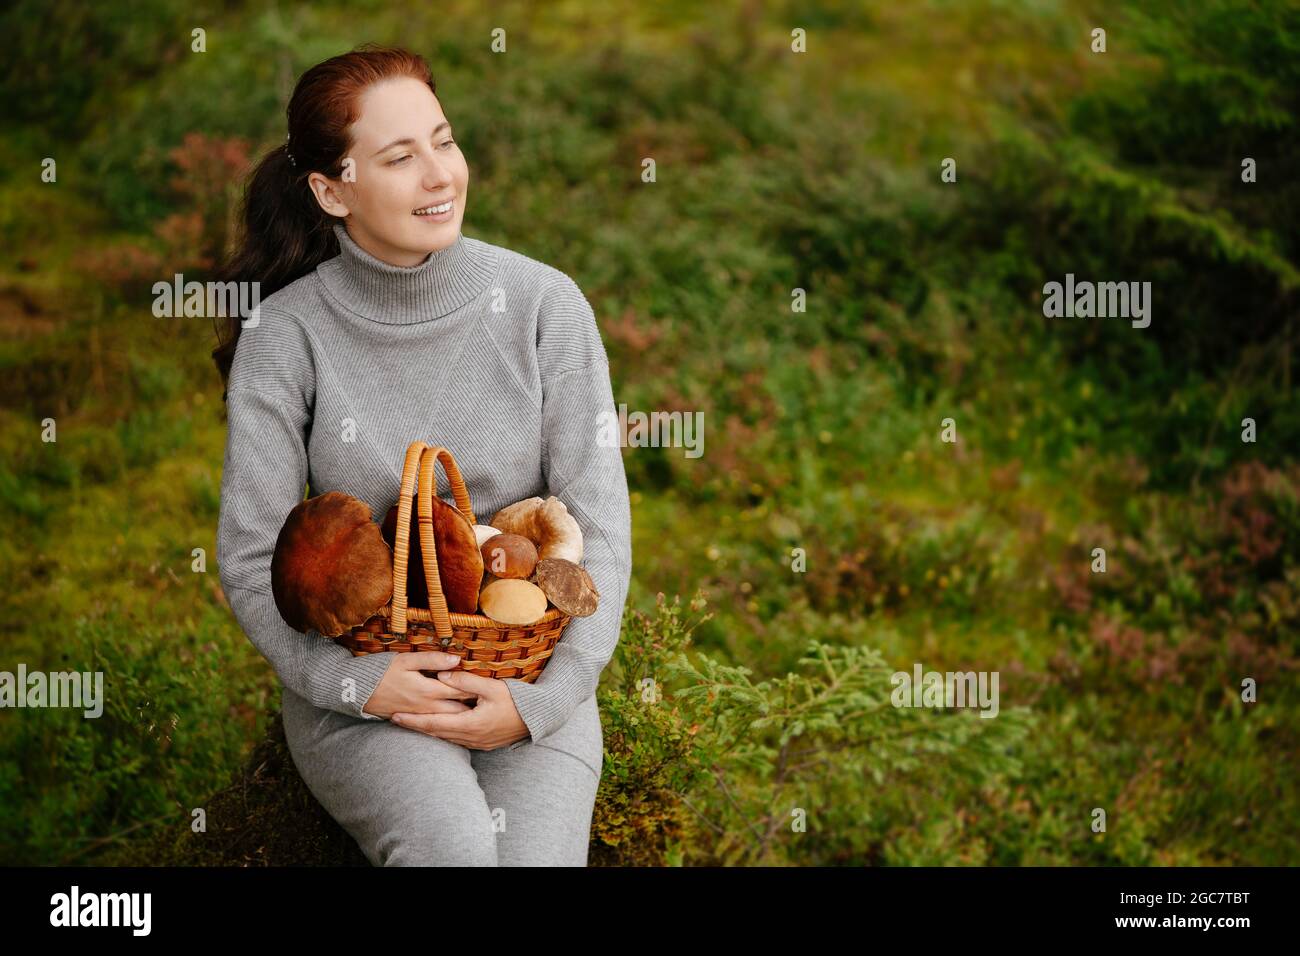 Woman is resting in a green forest with mushrooms Stock Photo